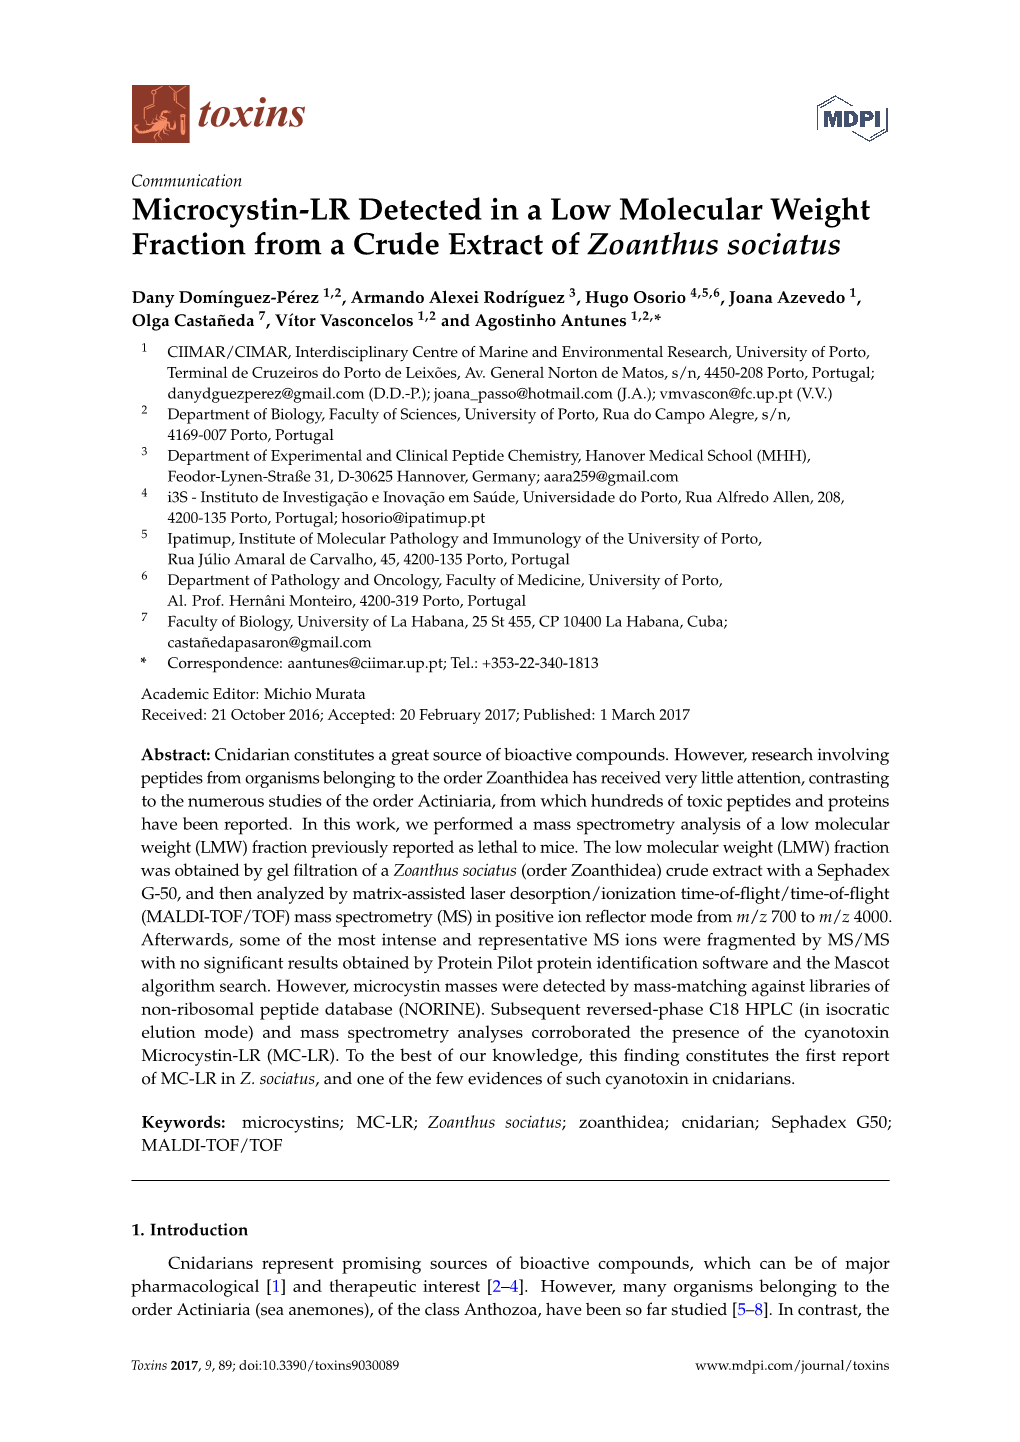 Microcystin-LR Detected in a Low Molecular Weight Fraction from a Crude Extract of Zoanthus Sociatus